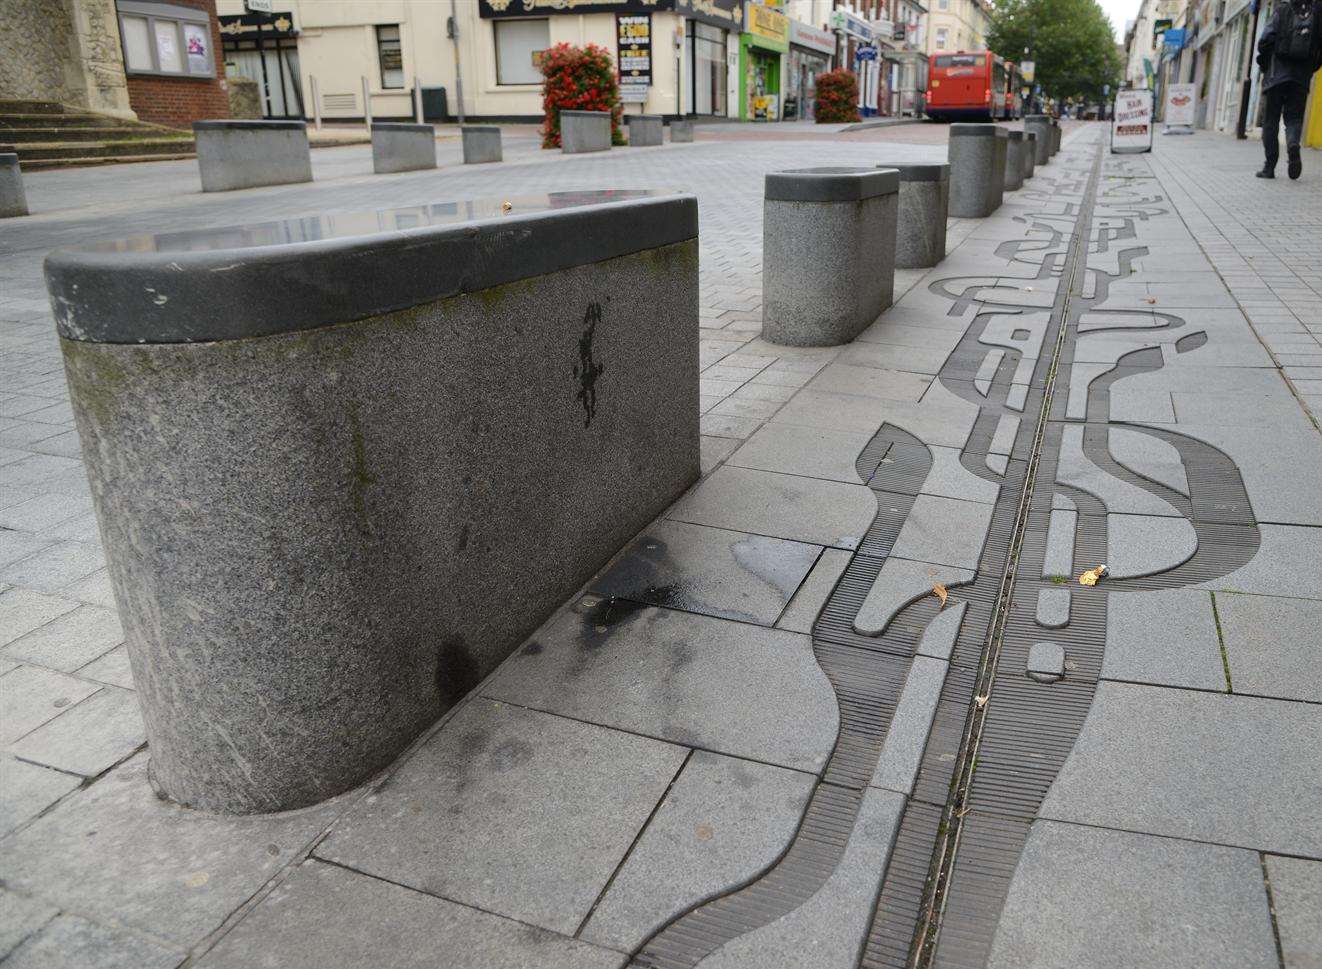 The controversial Flume in Bank Street, Ashford